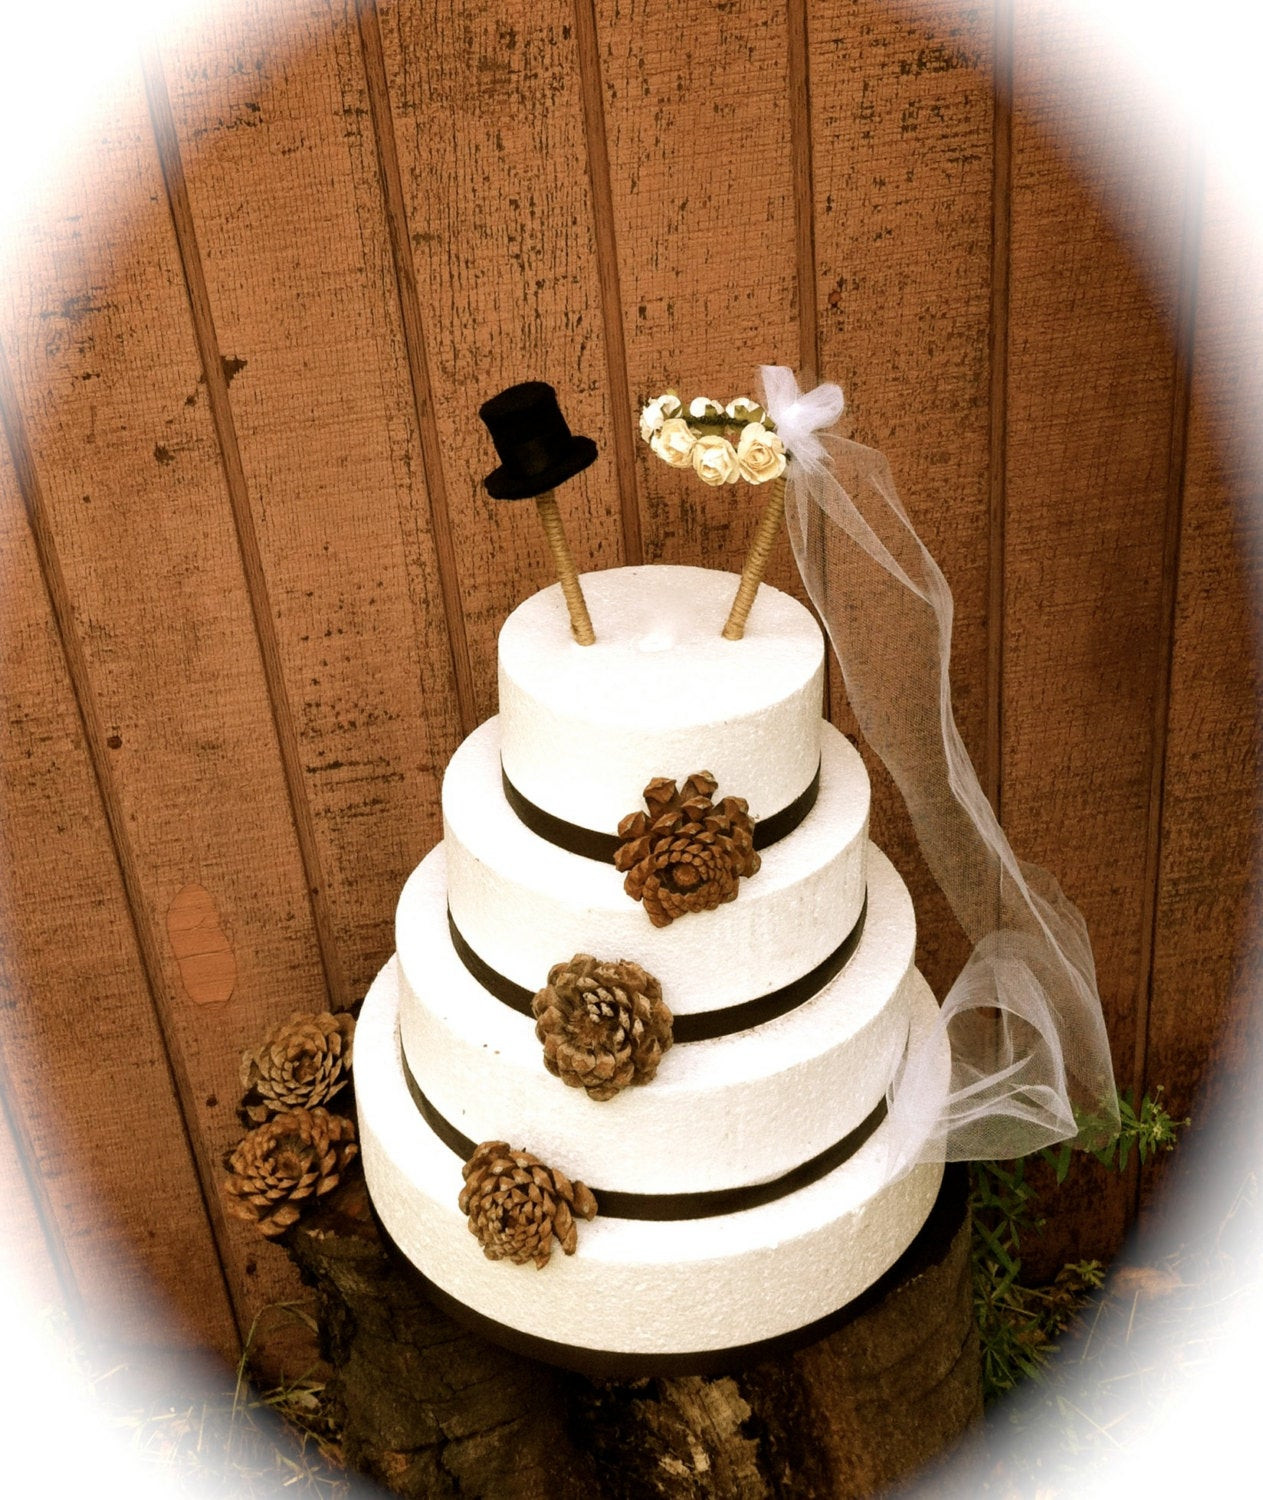 Country Wedding Cake Toppers
 Rustic Wedding Cake Topper Bride Groom Cake Topper